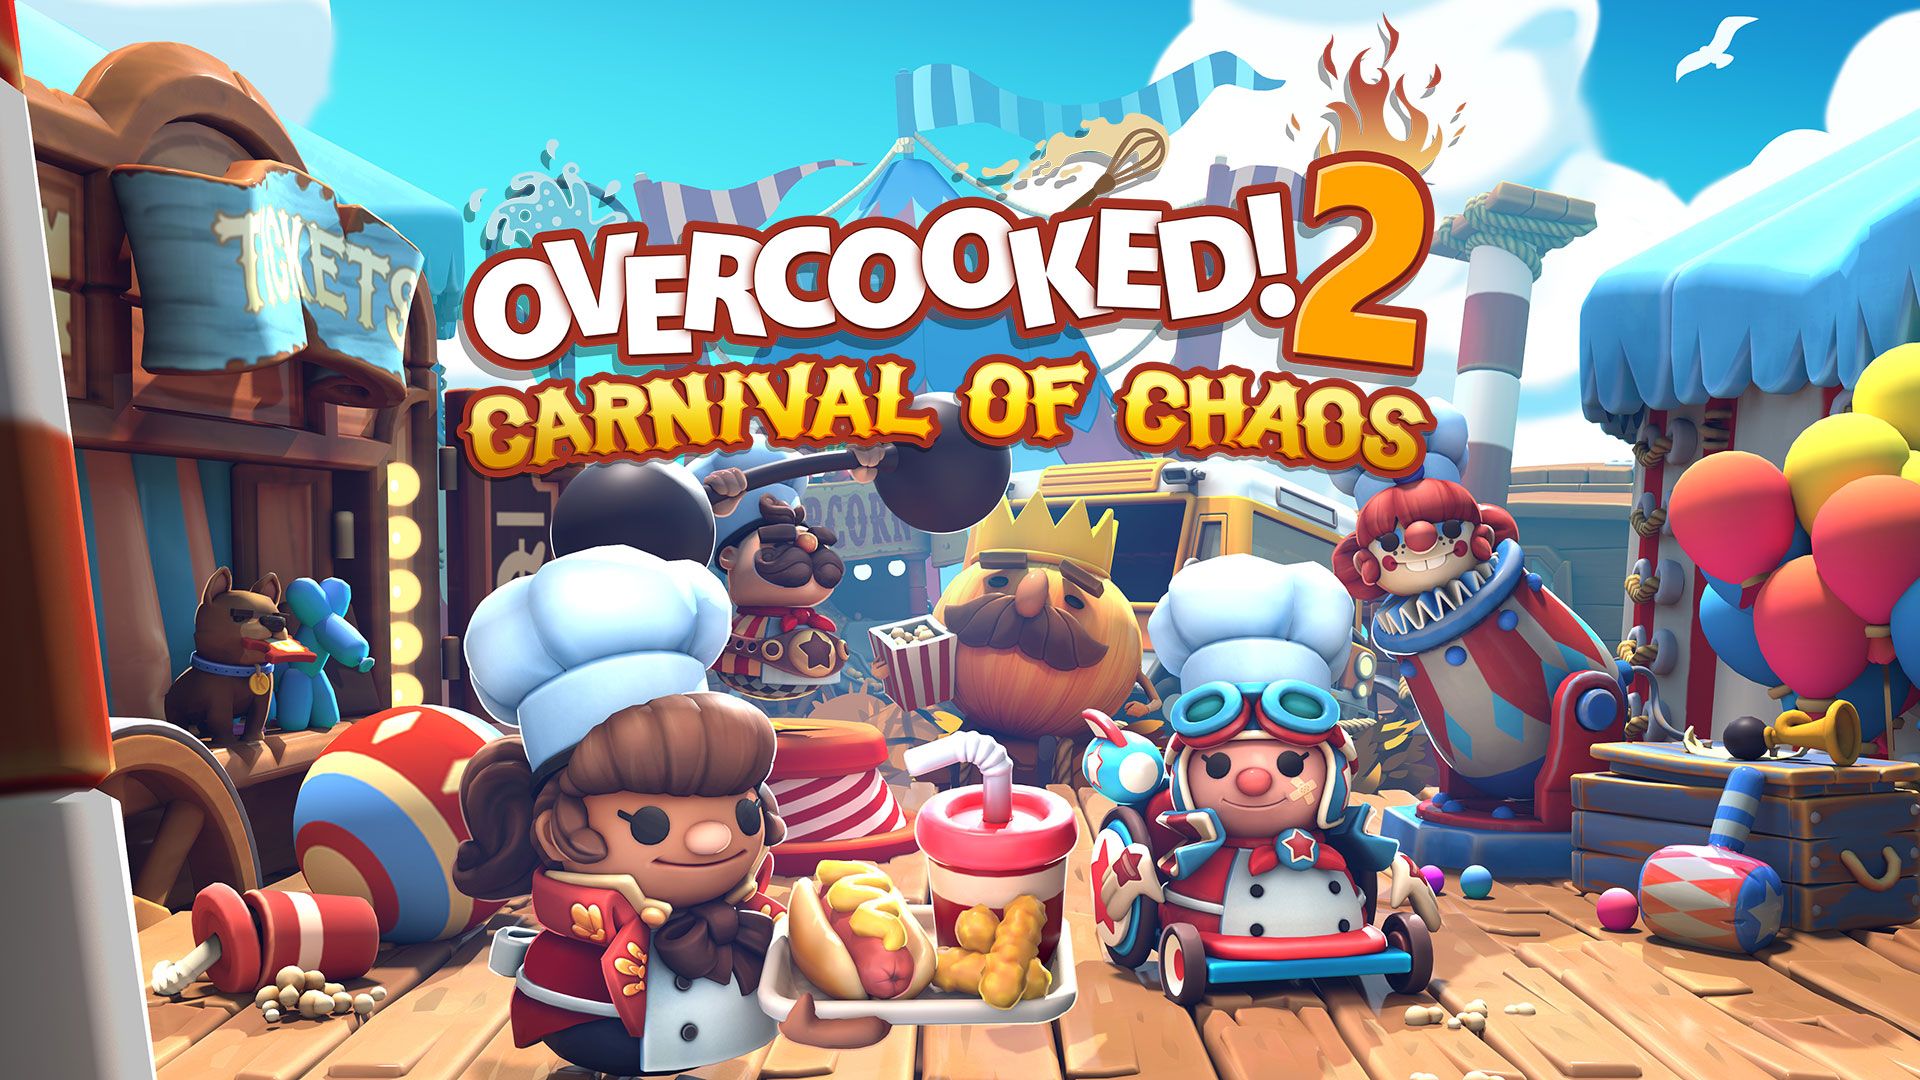 Overcooked 2 Carnival of Chaos, Team17